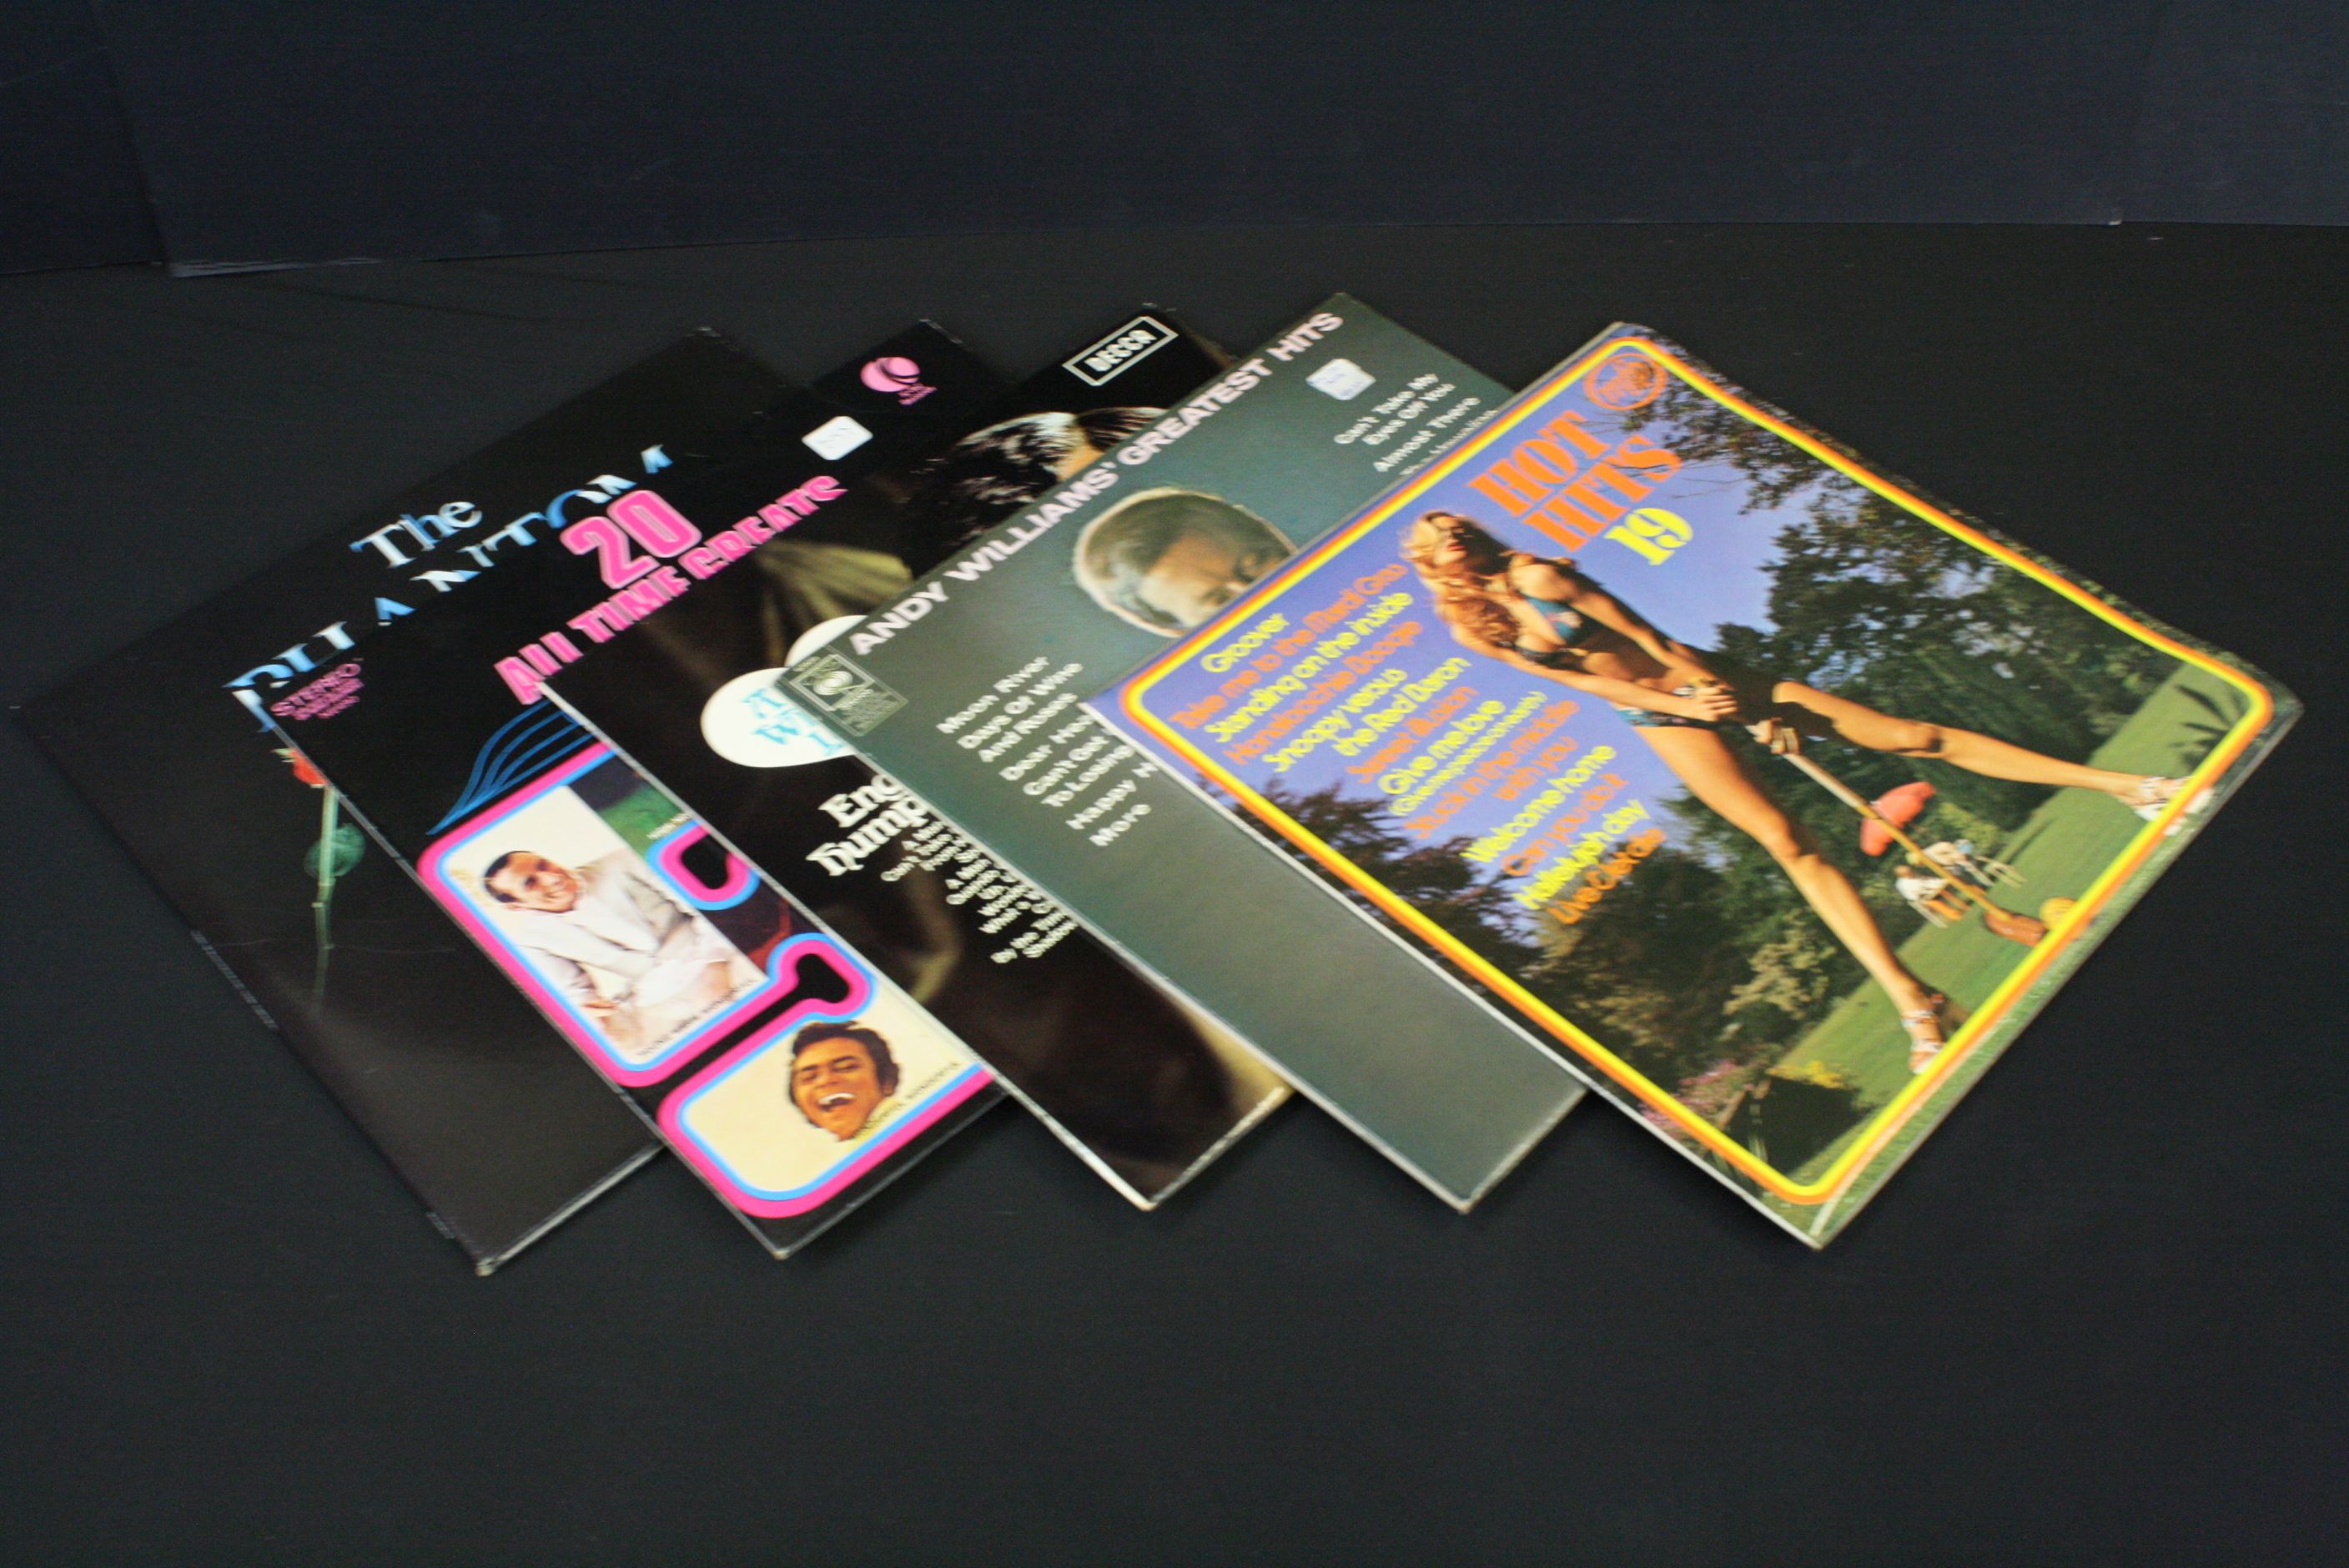 Vinyl - Over 50 LPs and a small quantity of box sets featuring mainly Film & TV soundtracks, Easy - Image 3 of 6